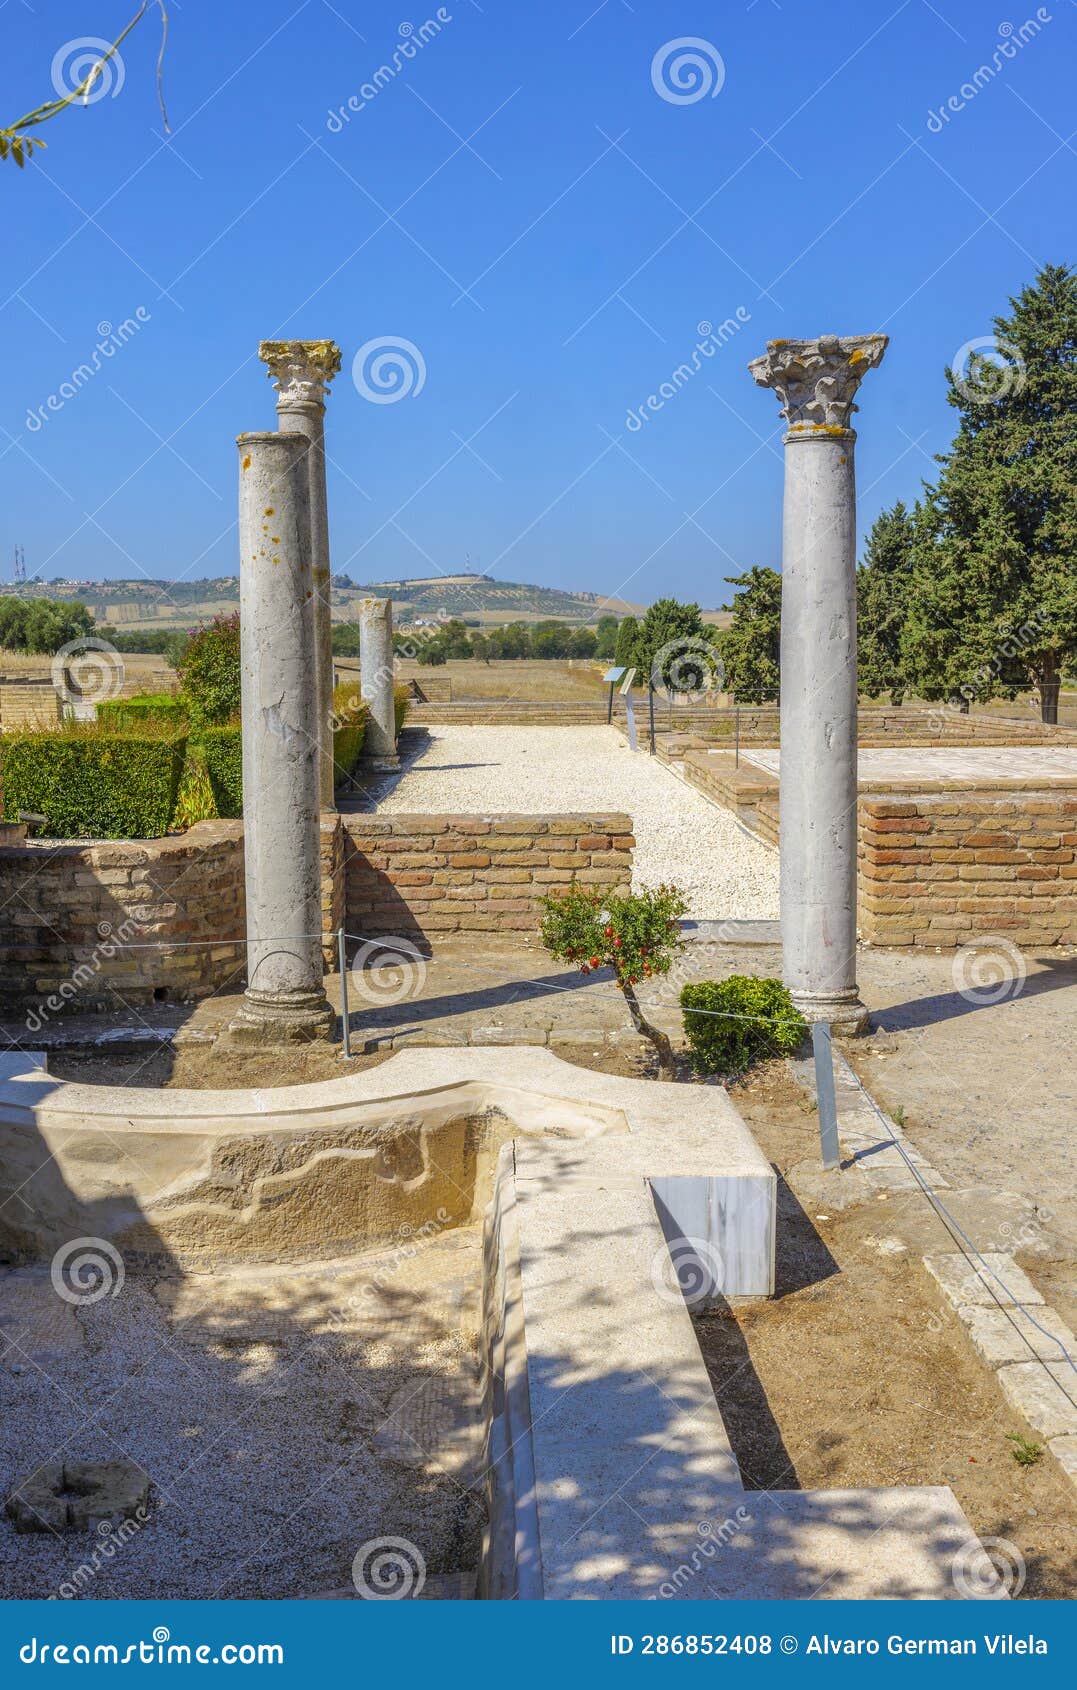 the roman city of italica. santiponce, andalusia, spain